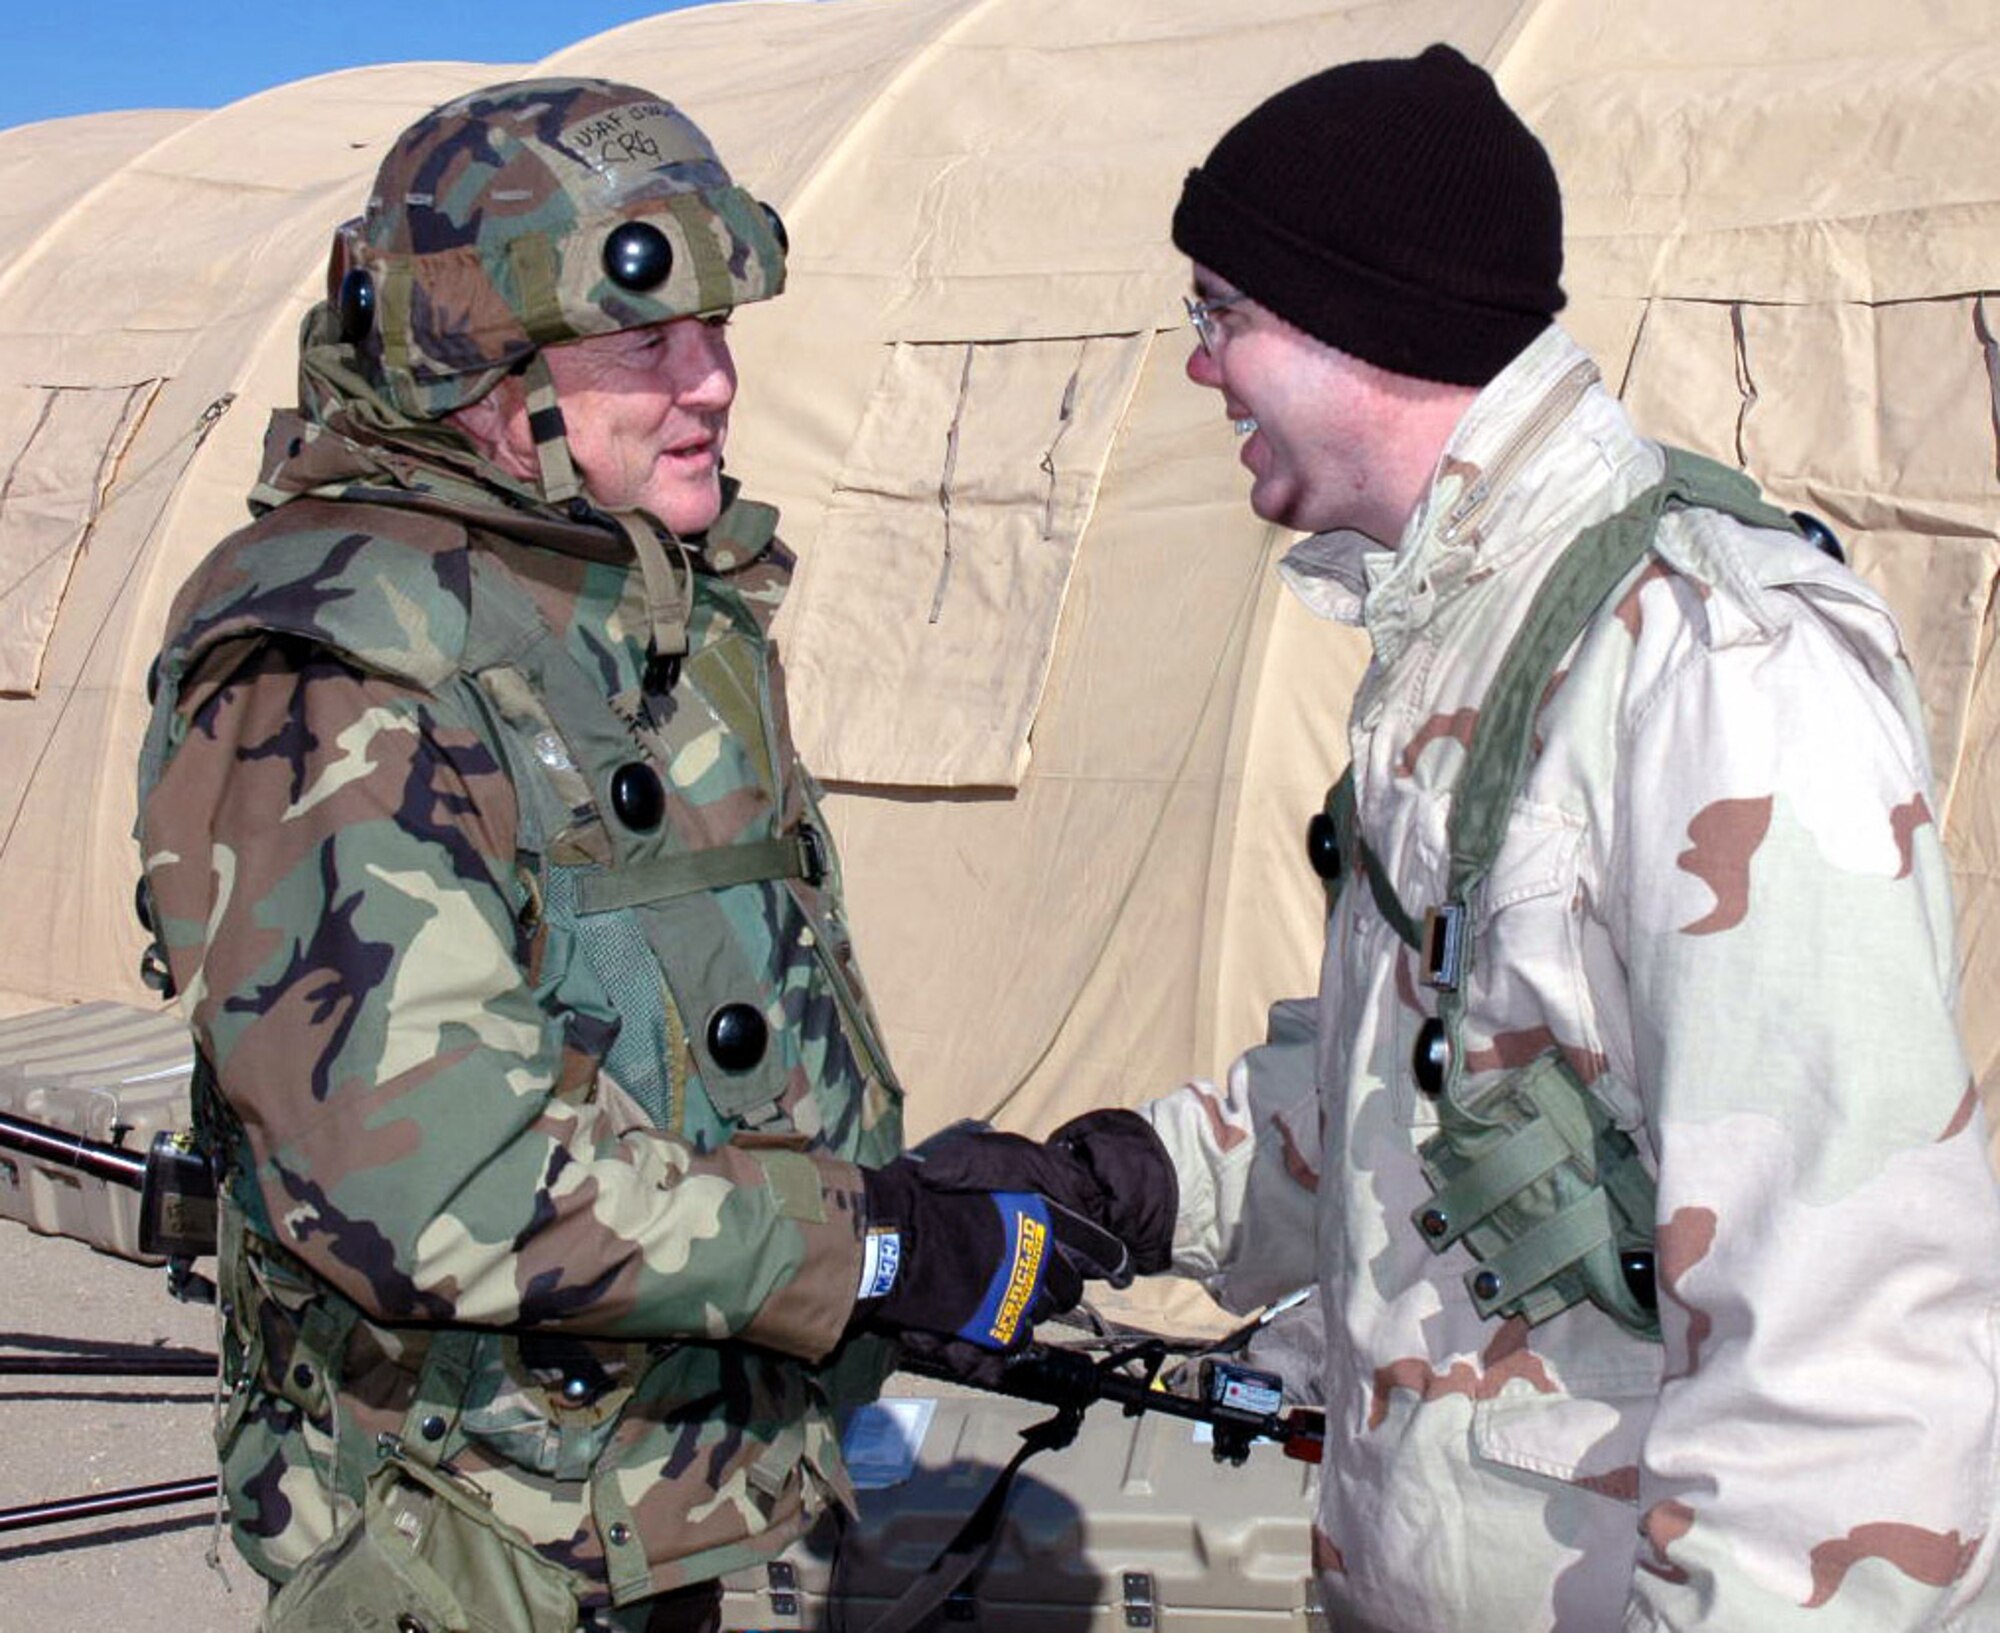 Airmen deployed as part of "421st Air Expeditionary Group" and the mock "National Army of Chimaera" shake hands while meeting for the first time in a scenario during operations for Exercise Eagle Flag 07-3 Feb. 10 at Naval Air Engineering Station Lakehurst, N.J. The exercise, operated by the Air Mobility Warfare Center's 421st Combat Training Squadron, tests and trains more than 400 Airmen on their expeditionary combat support skills. (U.S. Air Force photo/Tech. Sgt. Ron Rogers) 